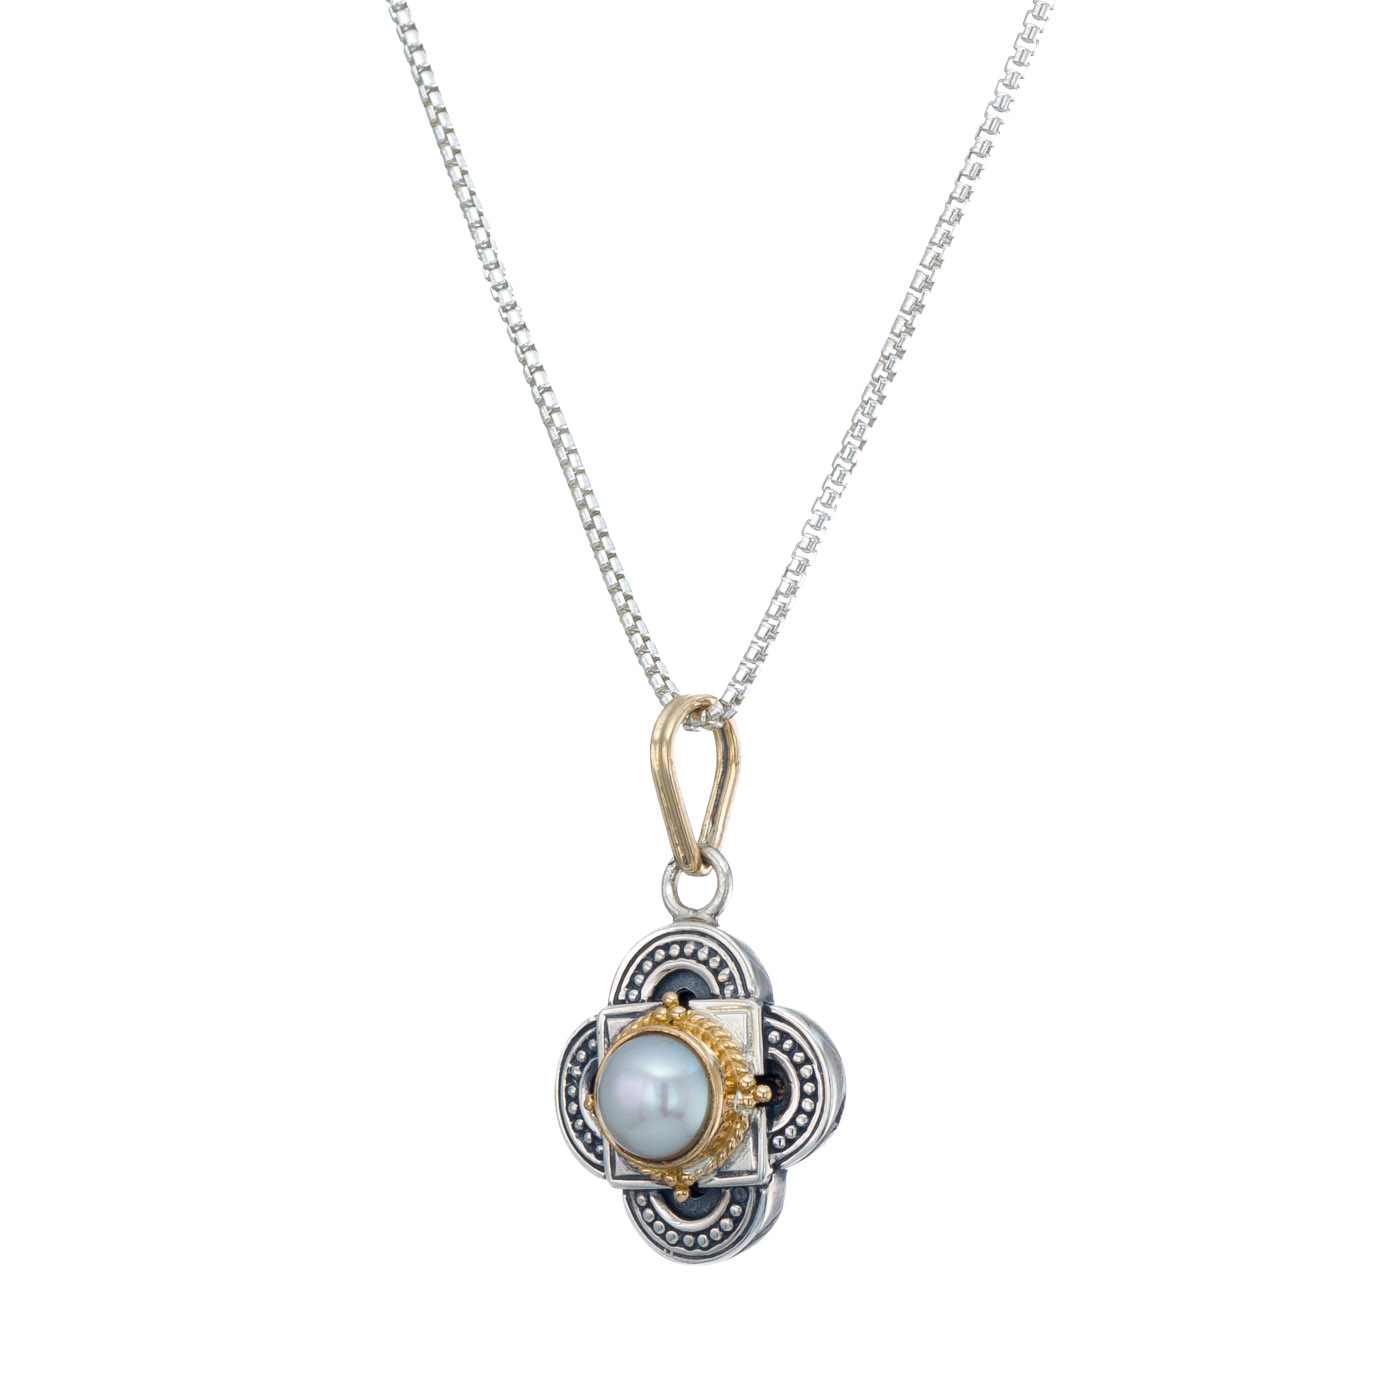 Cyclades pendant in 18K Gold and Sterling silver with pearl